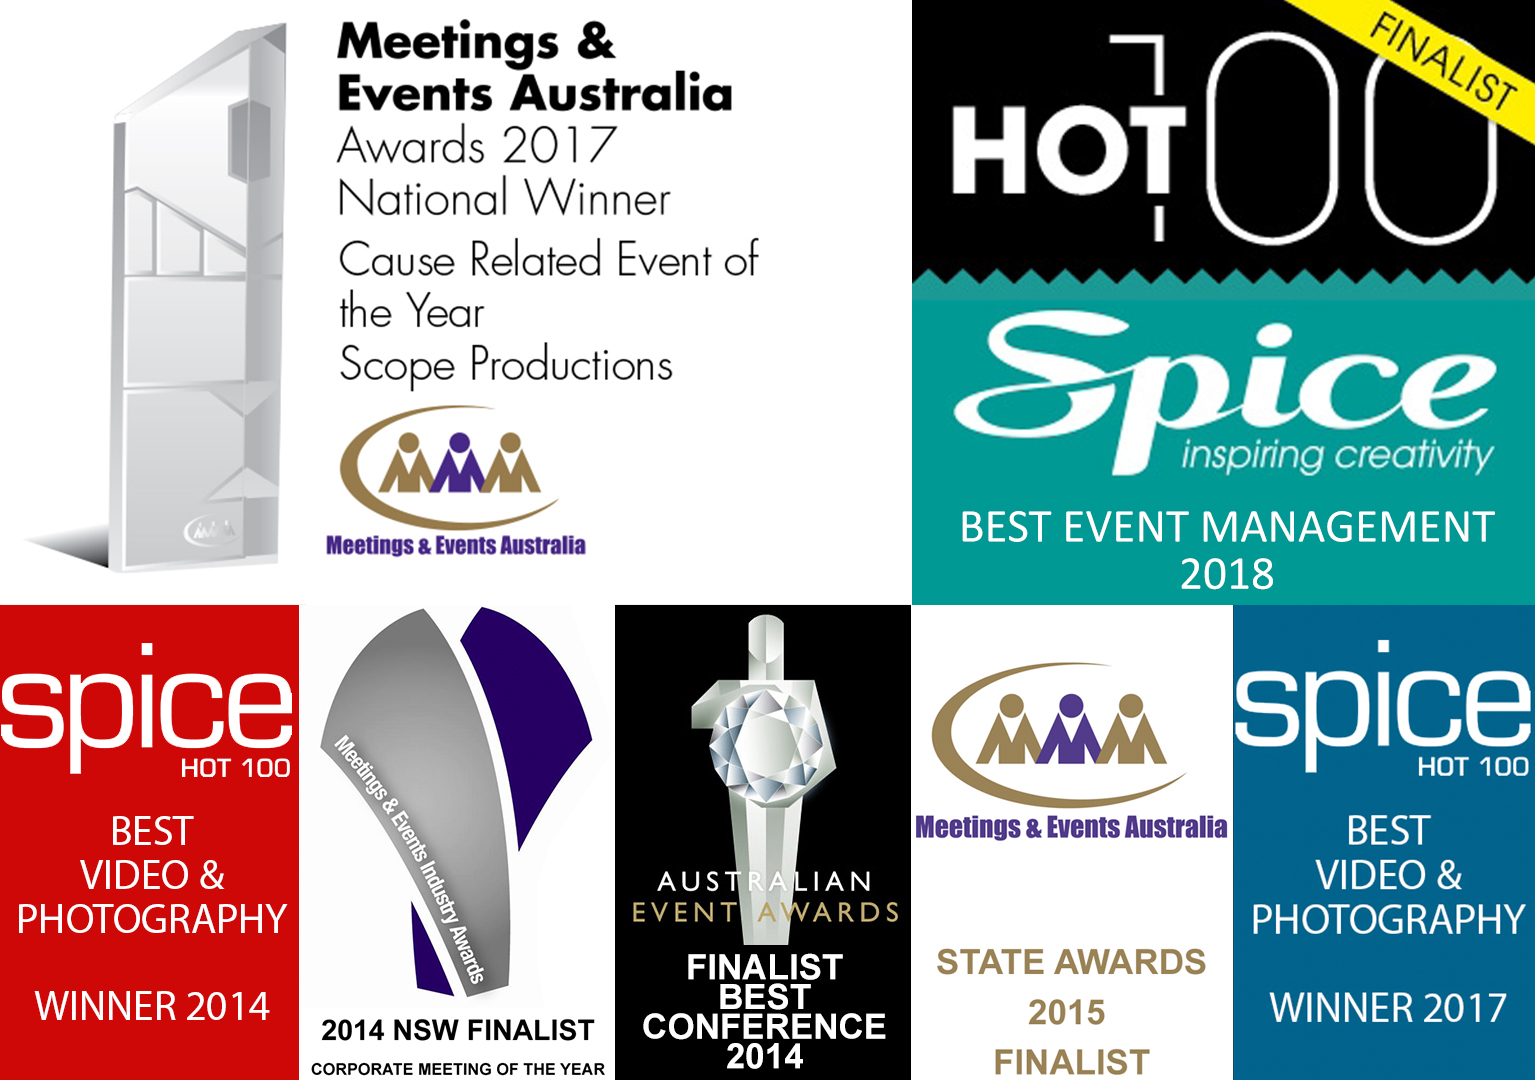 Awards Received By Scope Productions